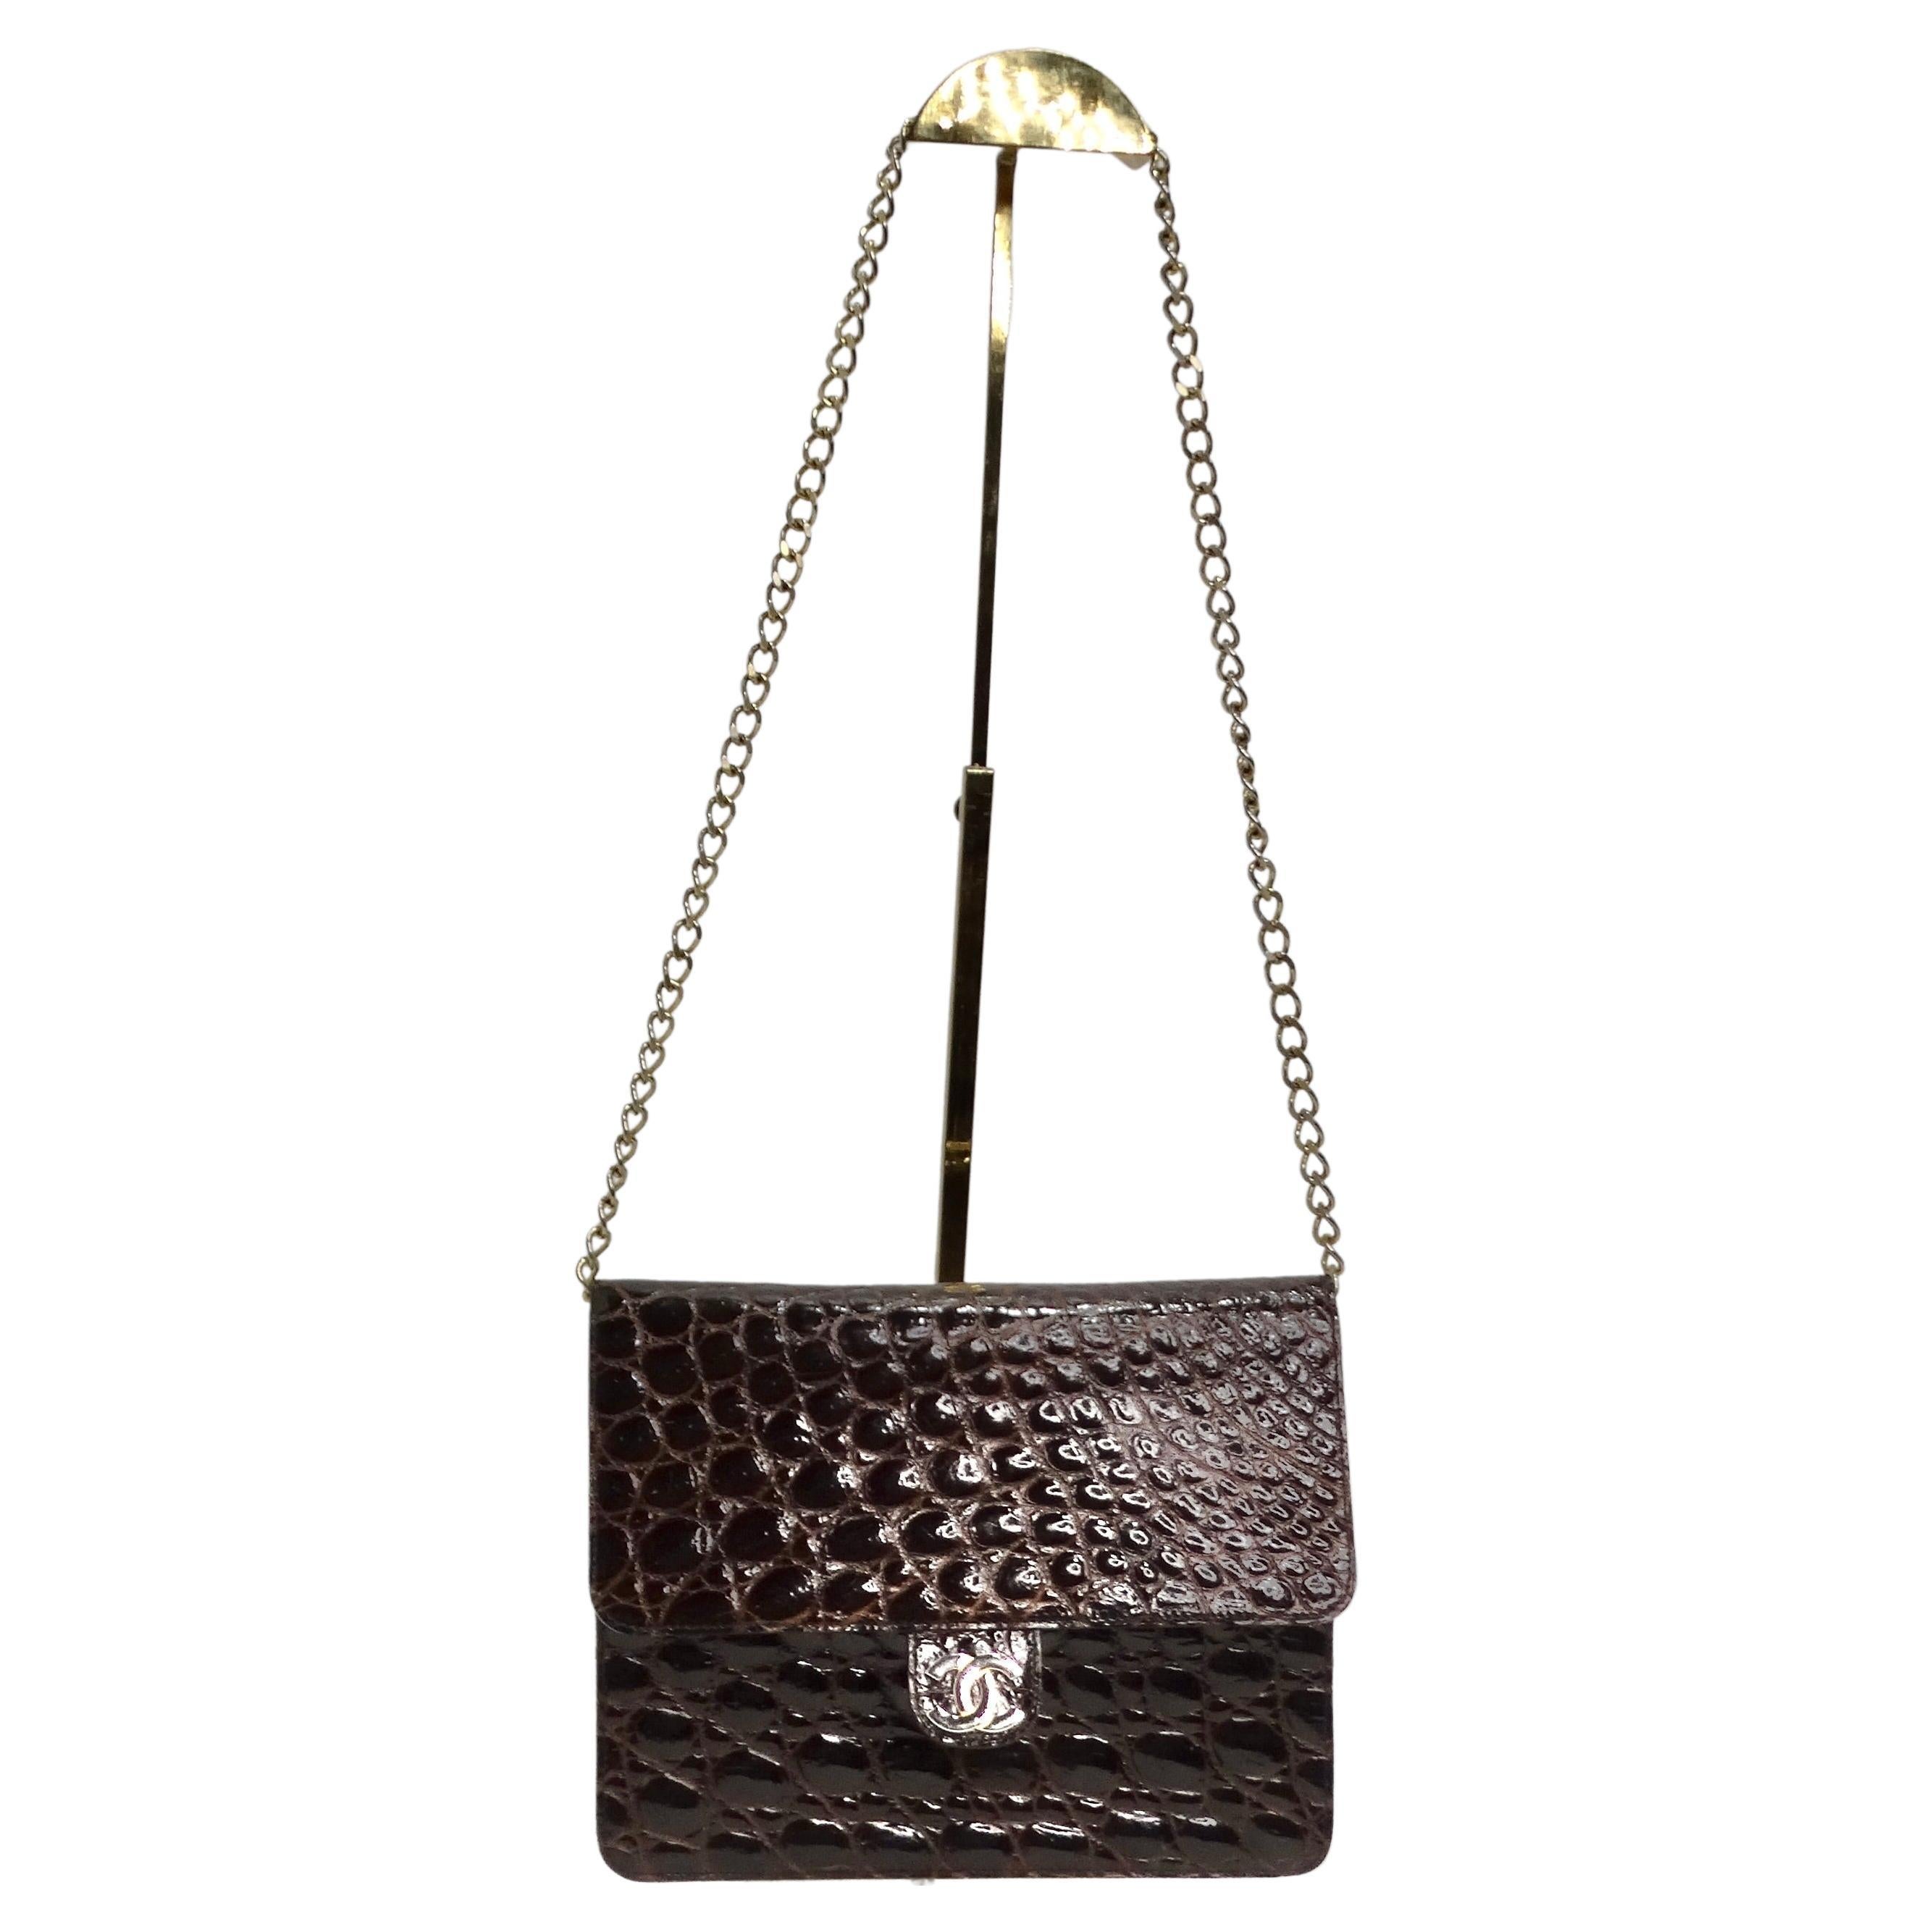 Indulge in luxury with the iconic Chanel 1980s Crocodile Handbag, a classic masterpiece that transcends time. Crafted in the 1980s, this Chanel handbag exudes vintage charm with its classic fold-over style. The rich red-brown crocodile leather